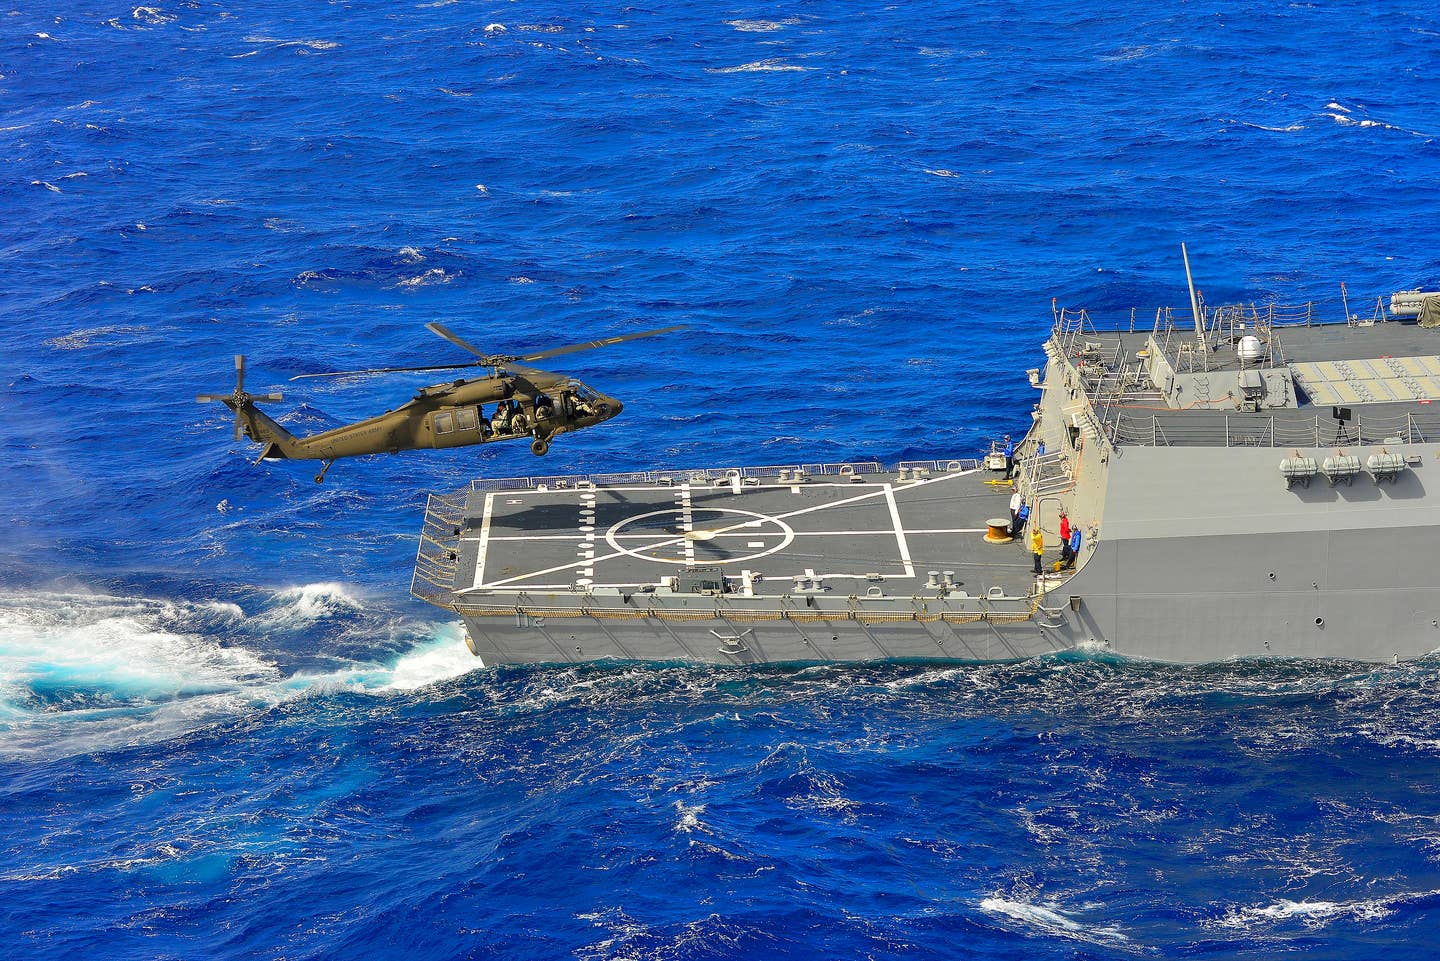 A U.S. Army Sikorsky UH-60M <em>Blackhawk</em> helicopter (s/n 20483) from the 25th Combat Aviation Brigade lands on the flight deck of the guided-missile destroyer USS <em>Michael Murphy</em> (DDG-112). <em>Michael Murphy</em> was underway participating in training exercise KOA KAI off the Hawaiian Islands (U.S. Navy)